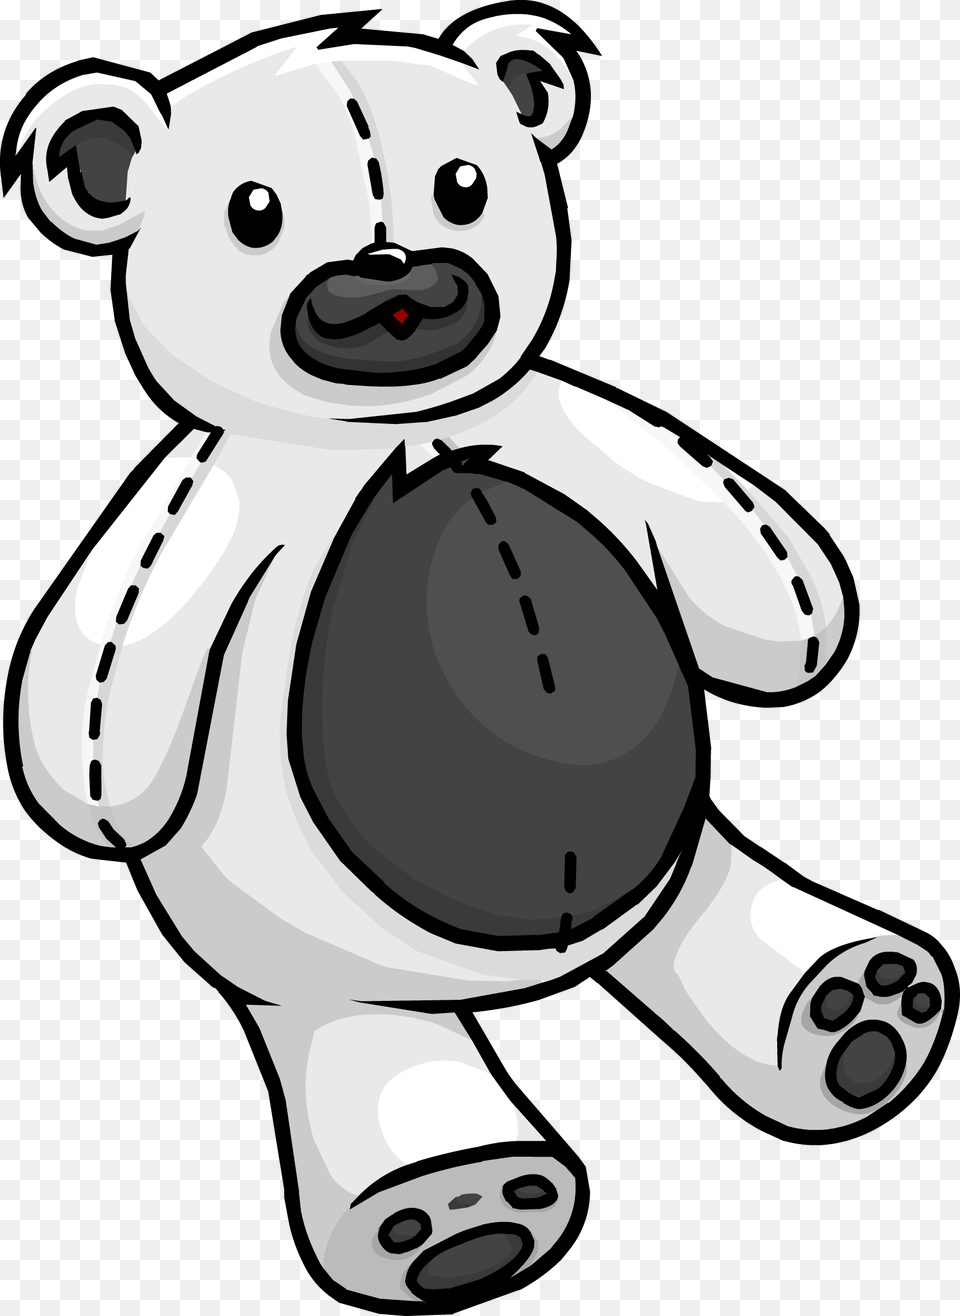 Club Penguin Rewritten Wiki Club Penguin Online Teddy Bear, Toy, Nature, Outdoors, Snow Free Png Download